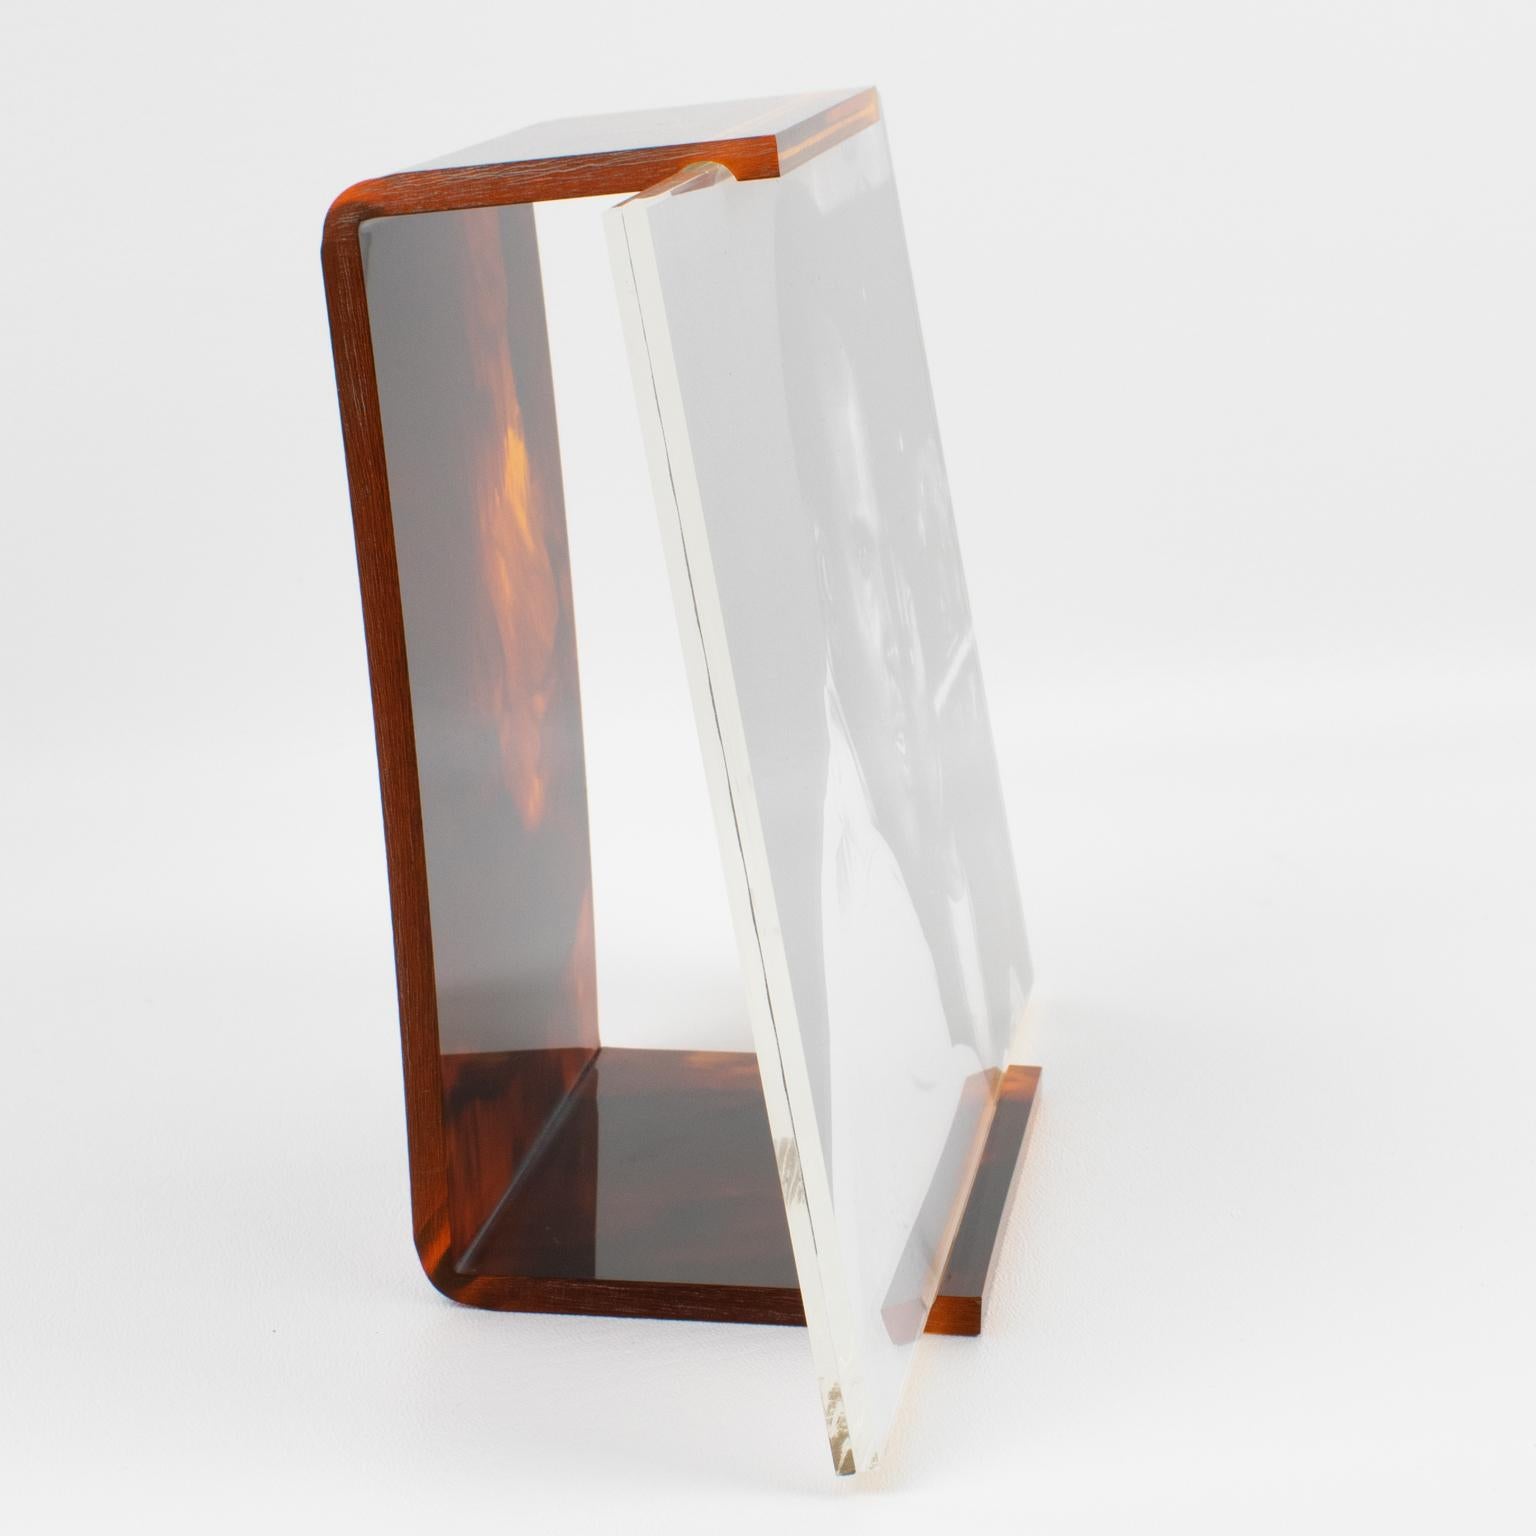 Acrylic Tortoiseshell Lucite Picture Frame, Italy 1970s